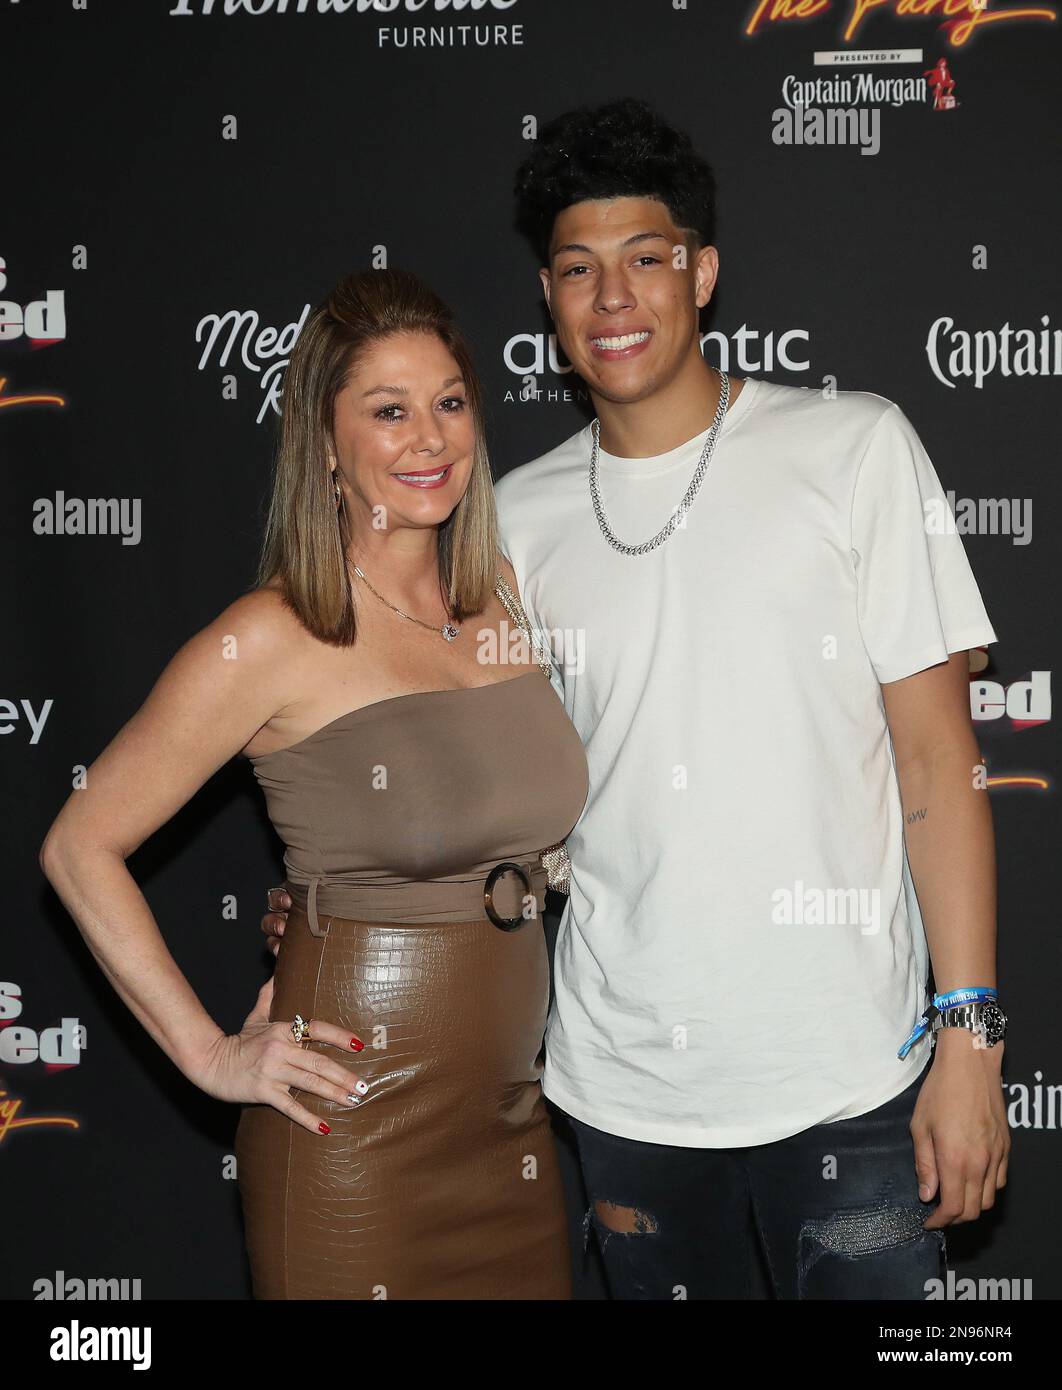 Scottsdale, USA. 12th Feb, 2023. Randi and Jackson Mahomes pose for a photo on the red carpet for the Sports Illustrated's 'The Party' presented by Captain Morgan in Scottsdale, Arizona on Saturday, February 11, 2023. Photo by Aaron Josefczyk/UPI Credit: UPI/Alamy Live News Stock Photo